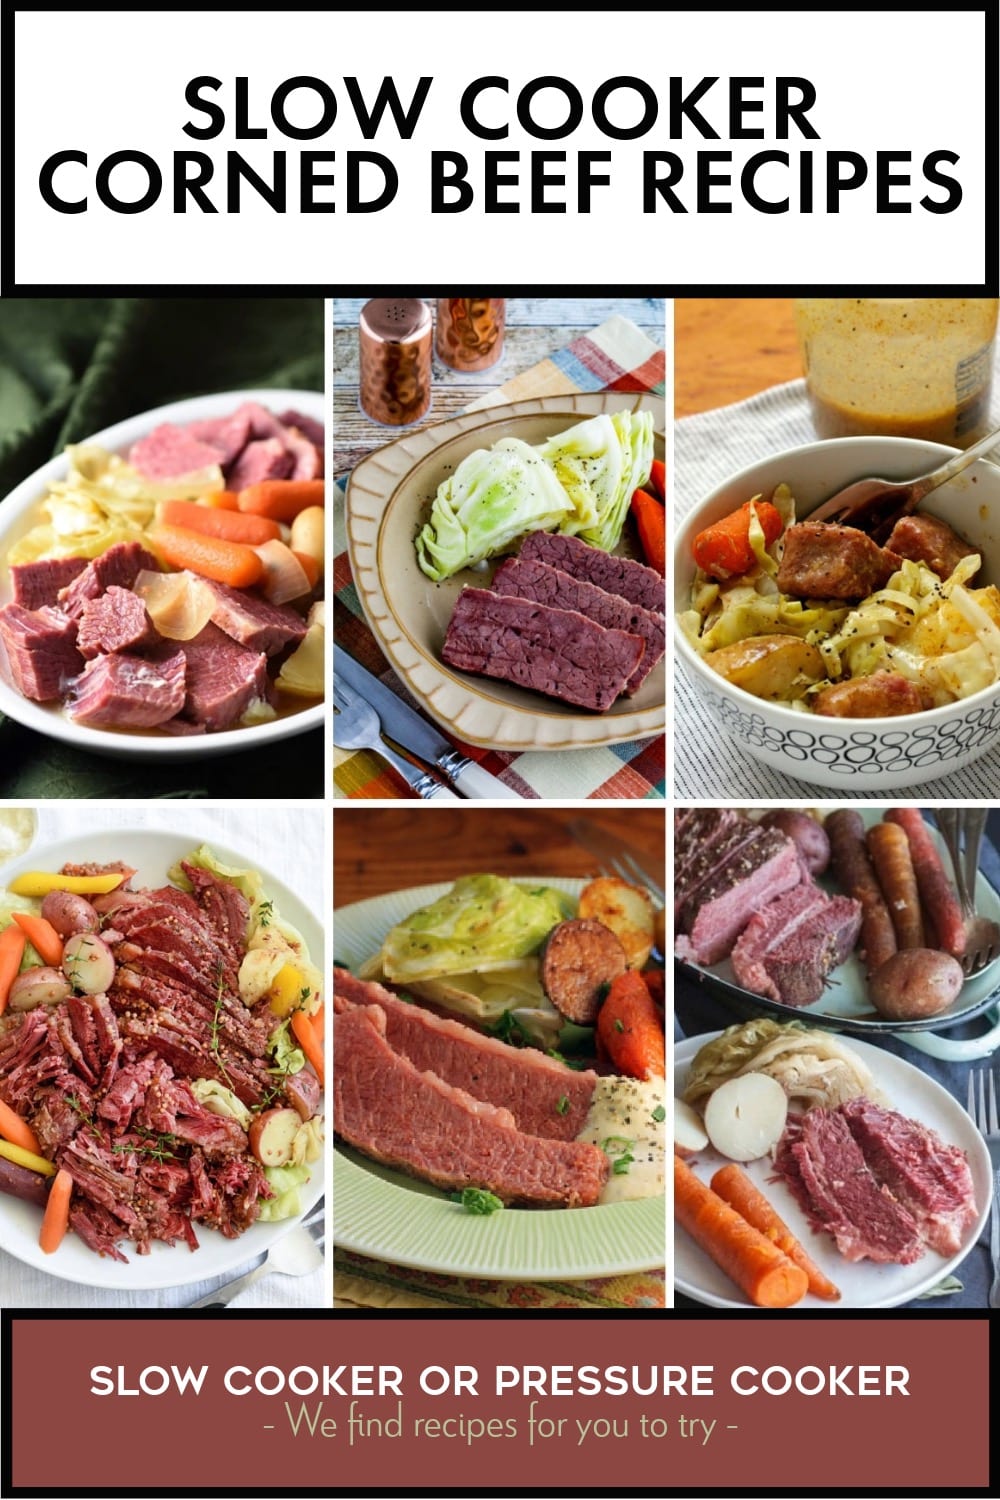 Pinterest image of Slow Cooker Corned Beef Recipes